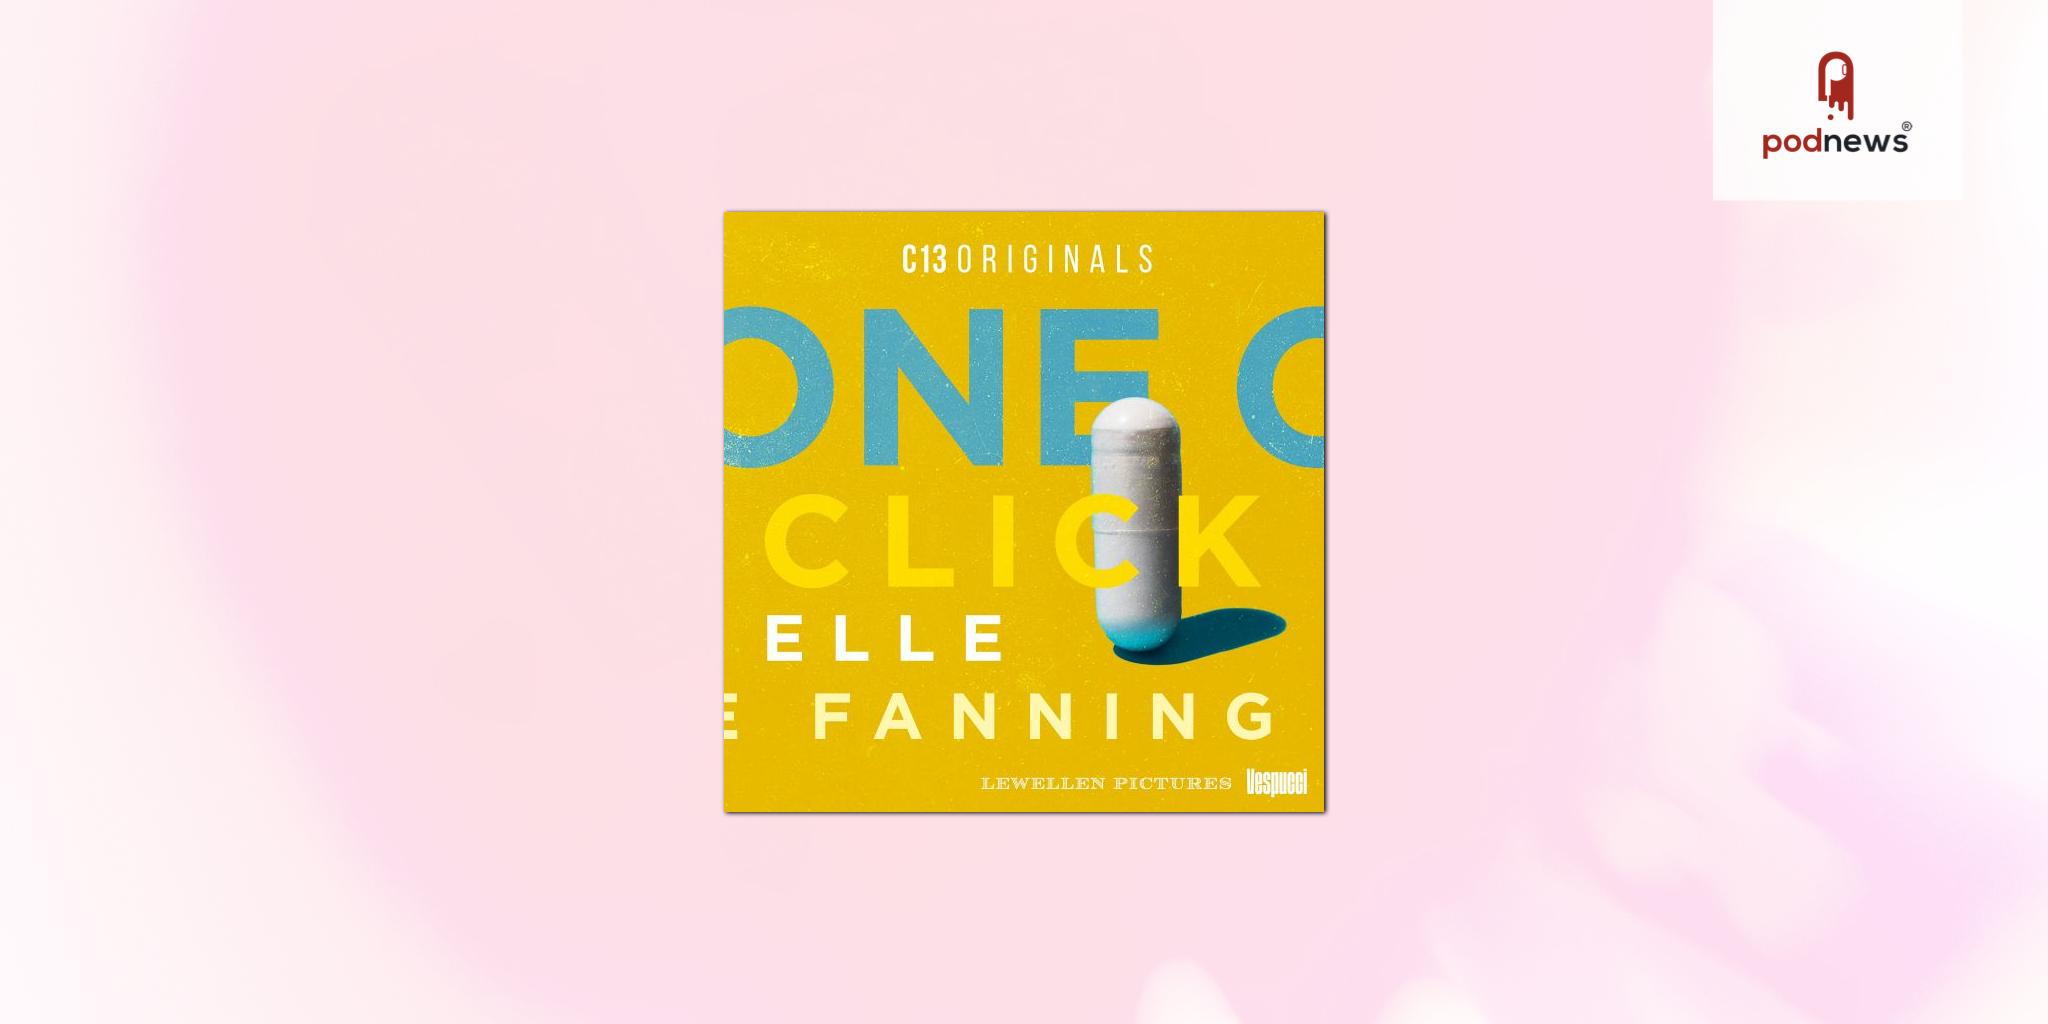 C13Originals and Vespucci Partner with Actress Elle Fanning to Launch One Click Documentary Podcast